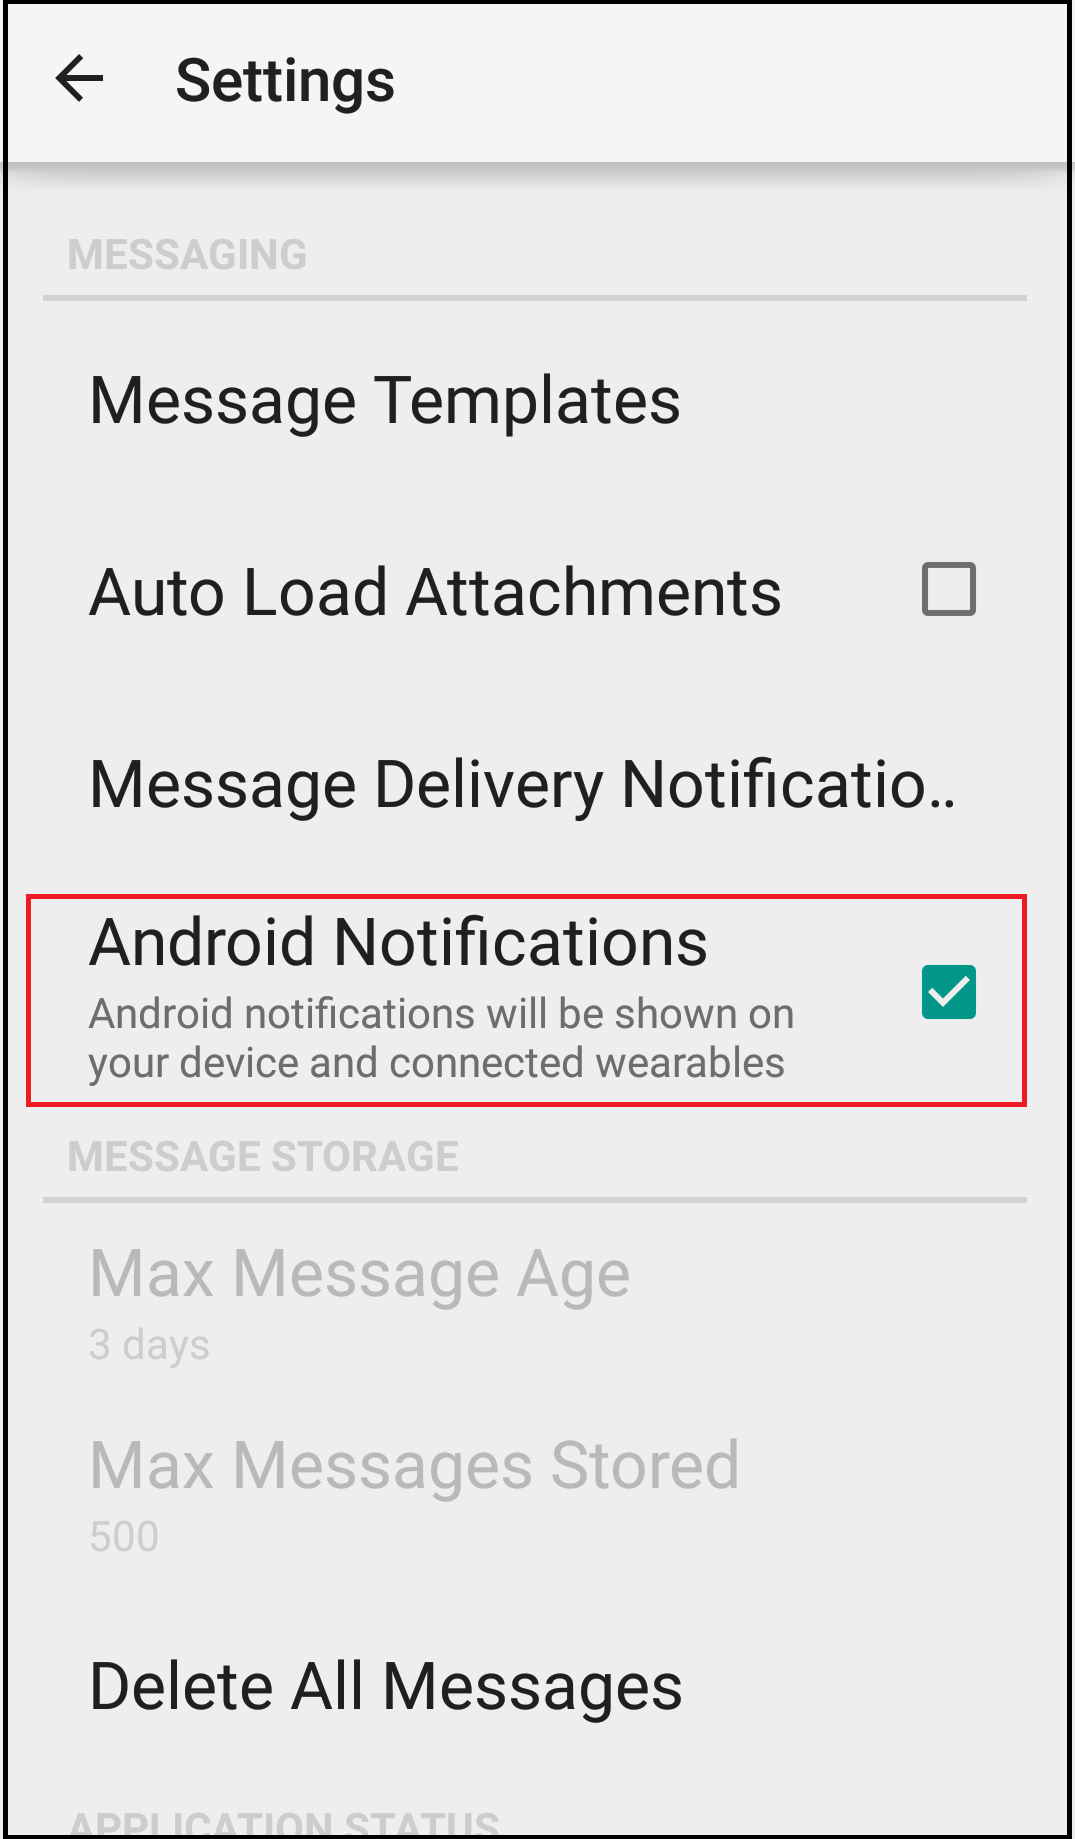 SMAWD_4.3_AndroidNotifications.png